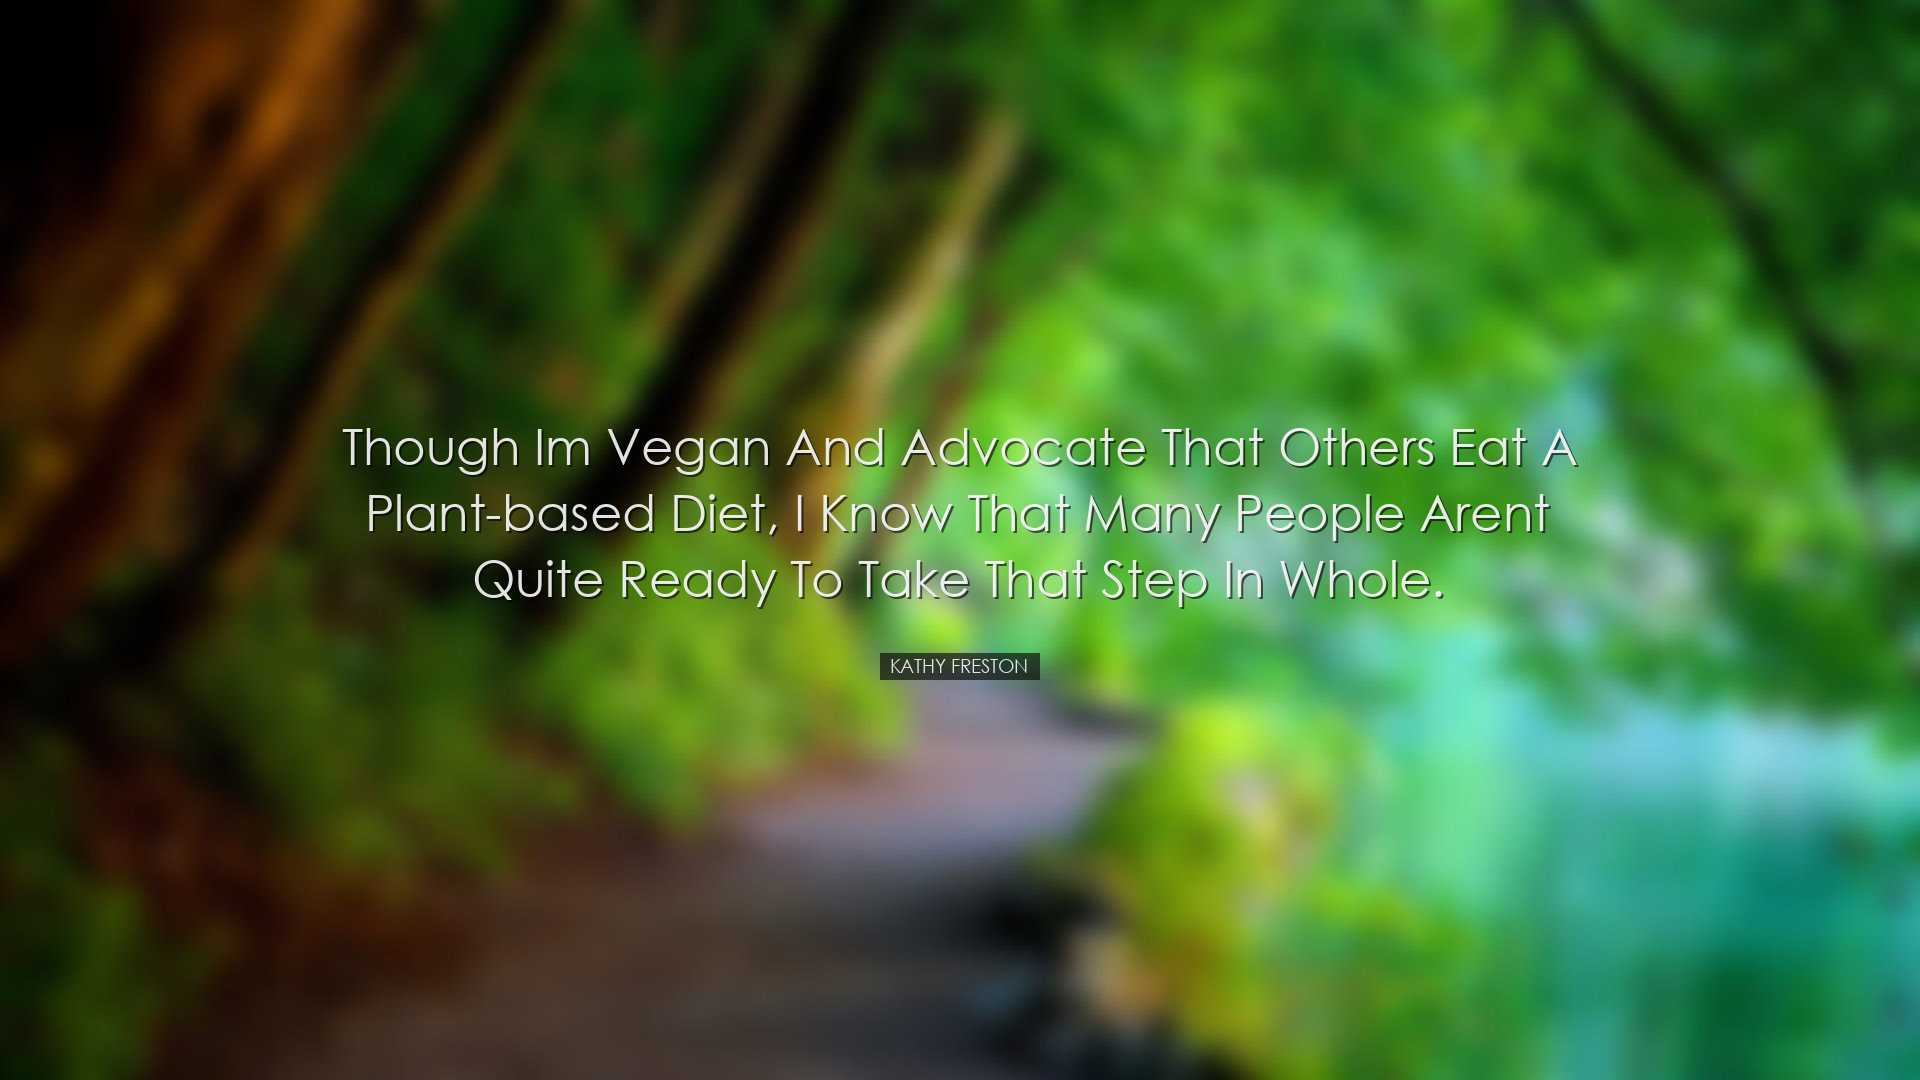 Though Im vegan and advocate that others eat a plant-based diet, I